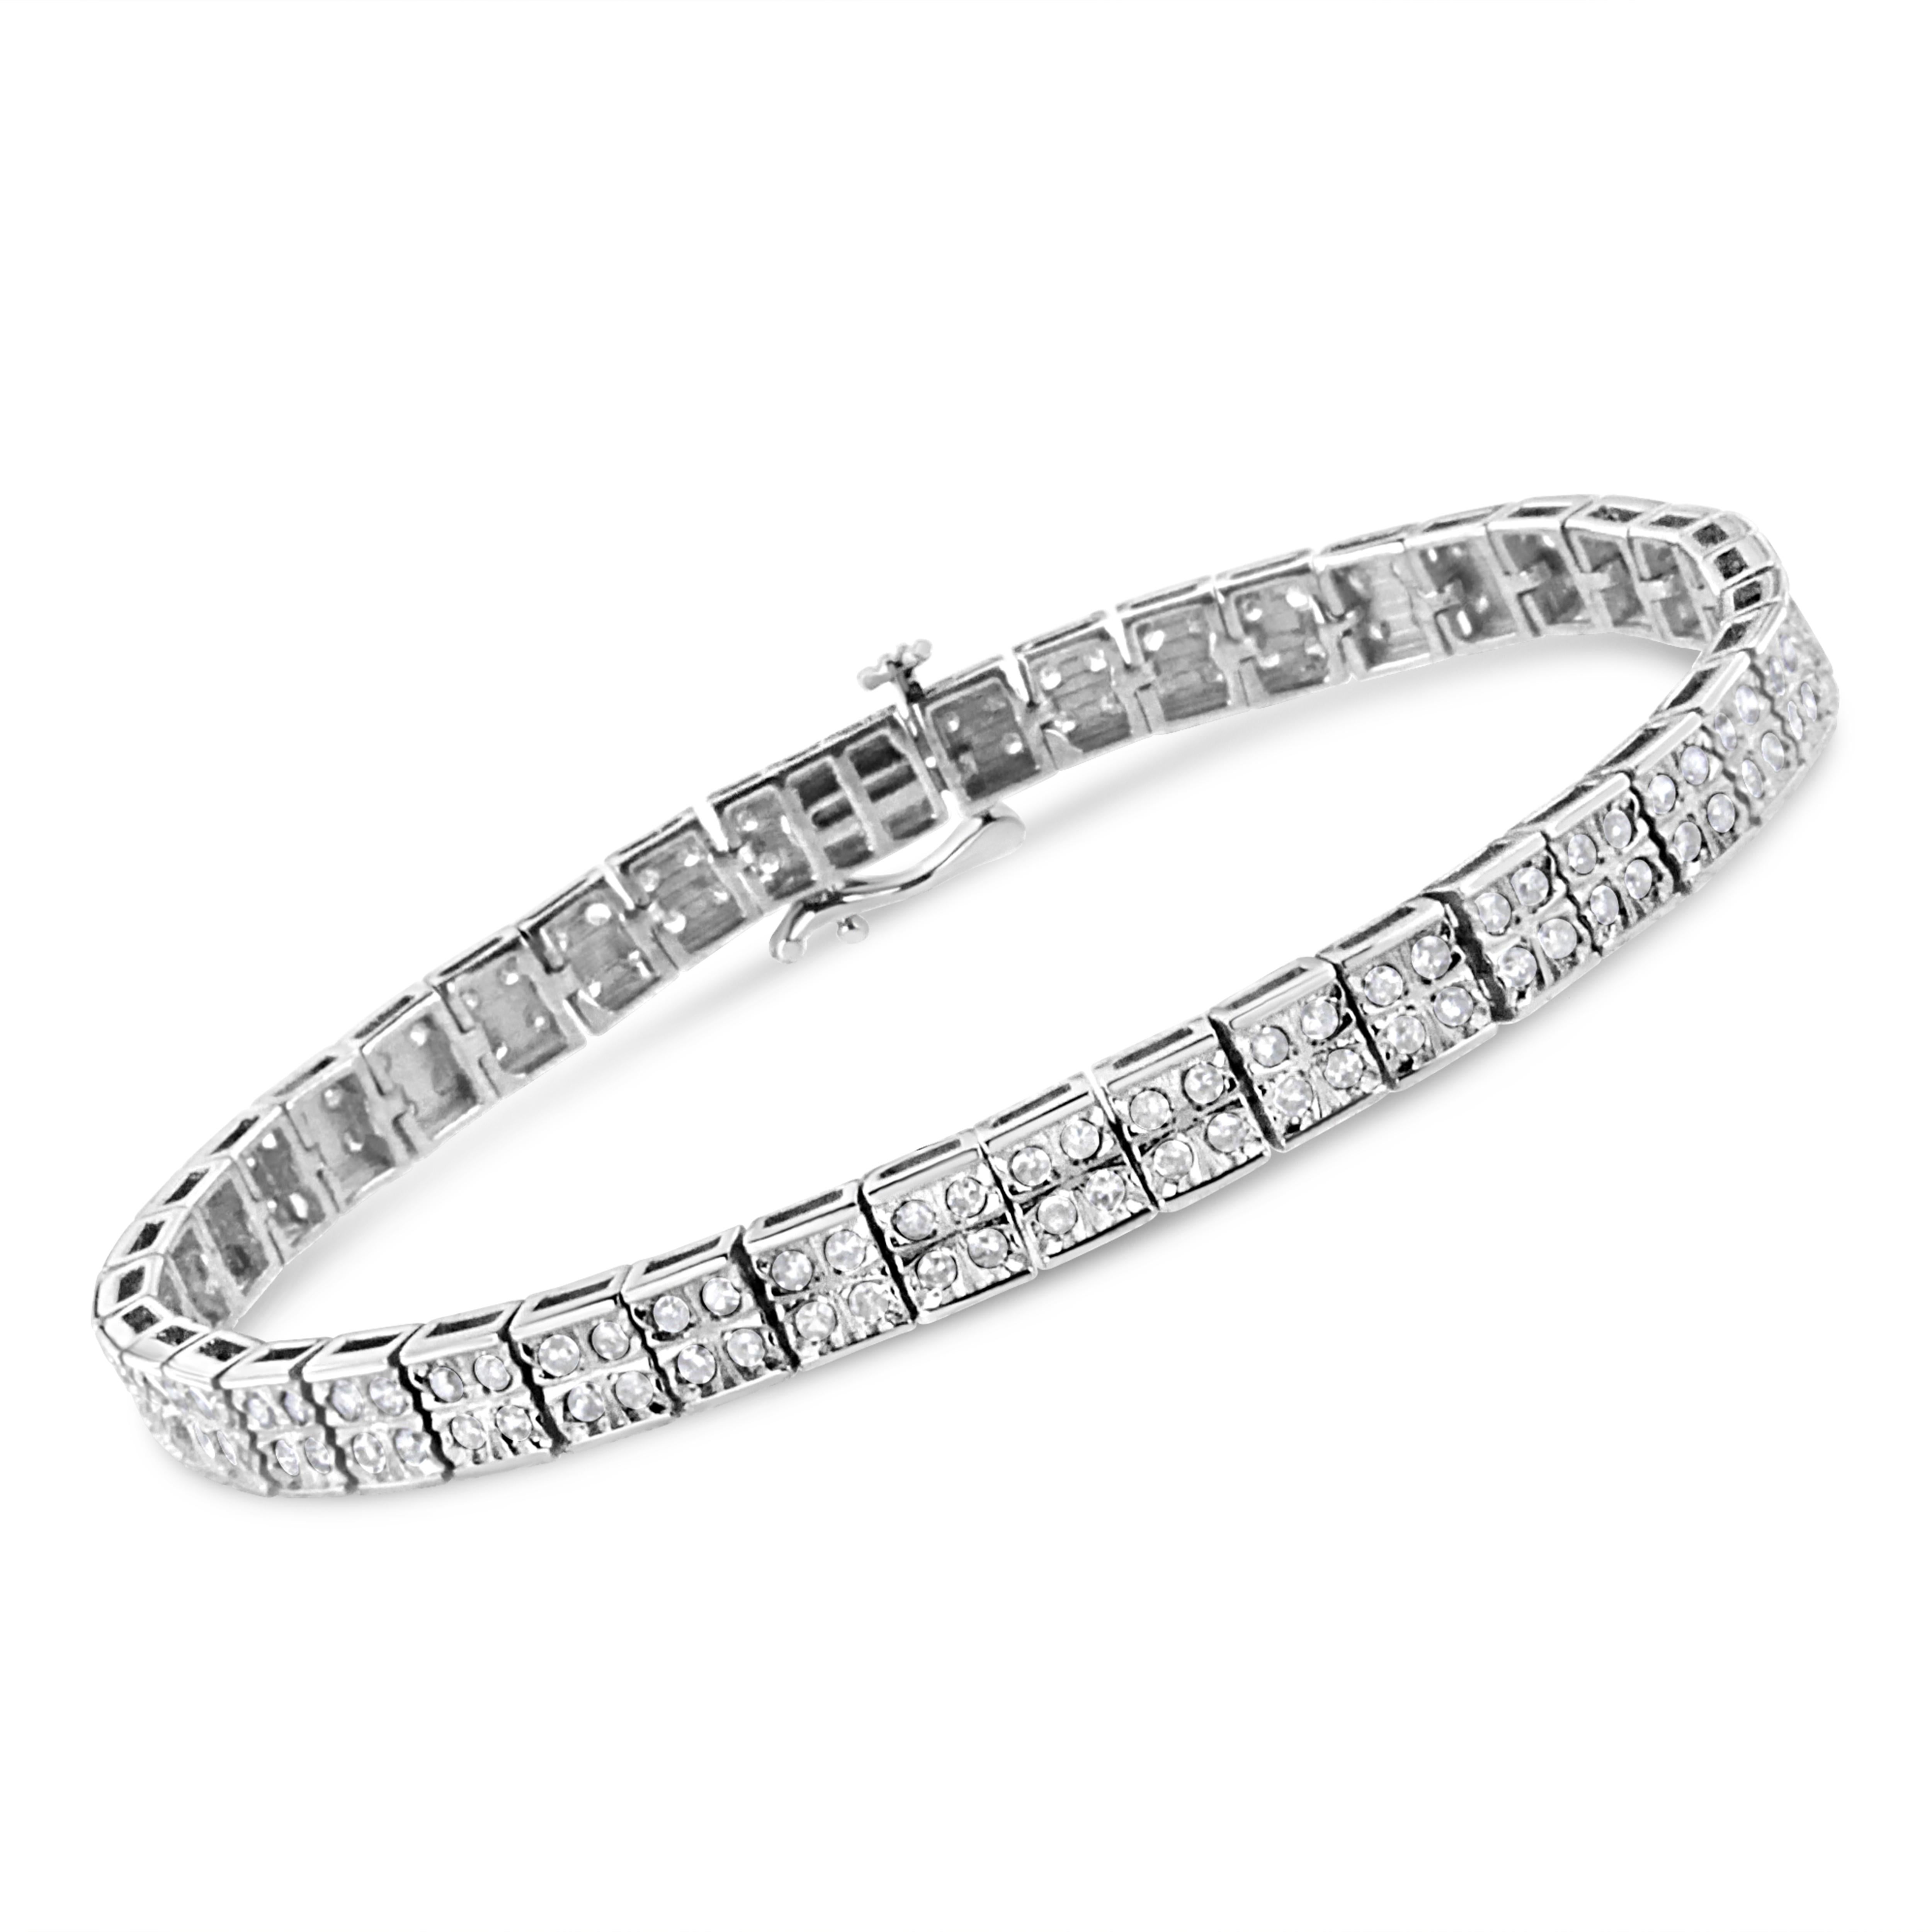 This beautiful link bracelet has a glamorous twist on a classic design. Square silver links are embellished with four stunning round-cut diamonds in an elegant prong setting. This authentic design is crafted of real 92.5% sterling silver that has